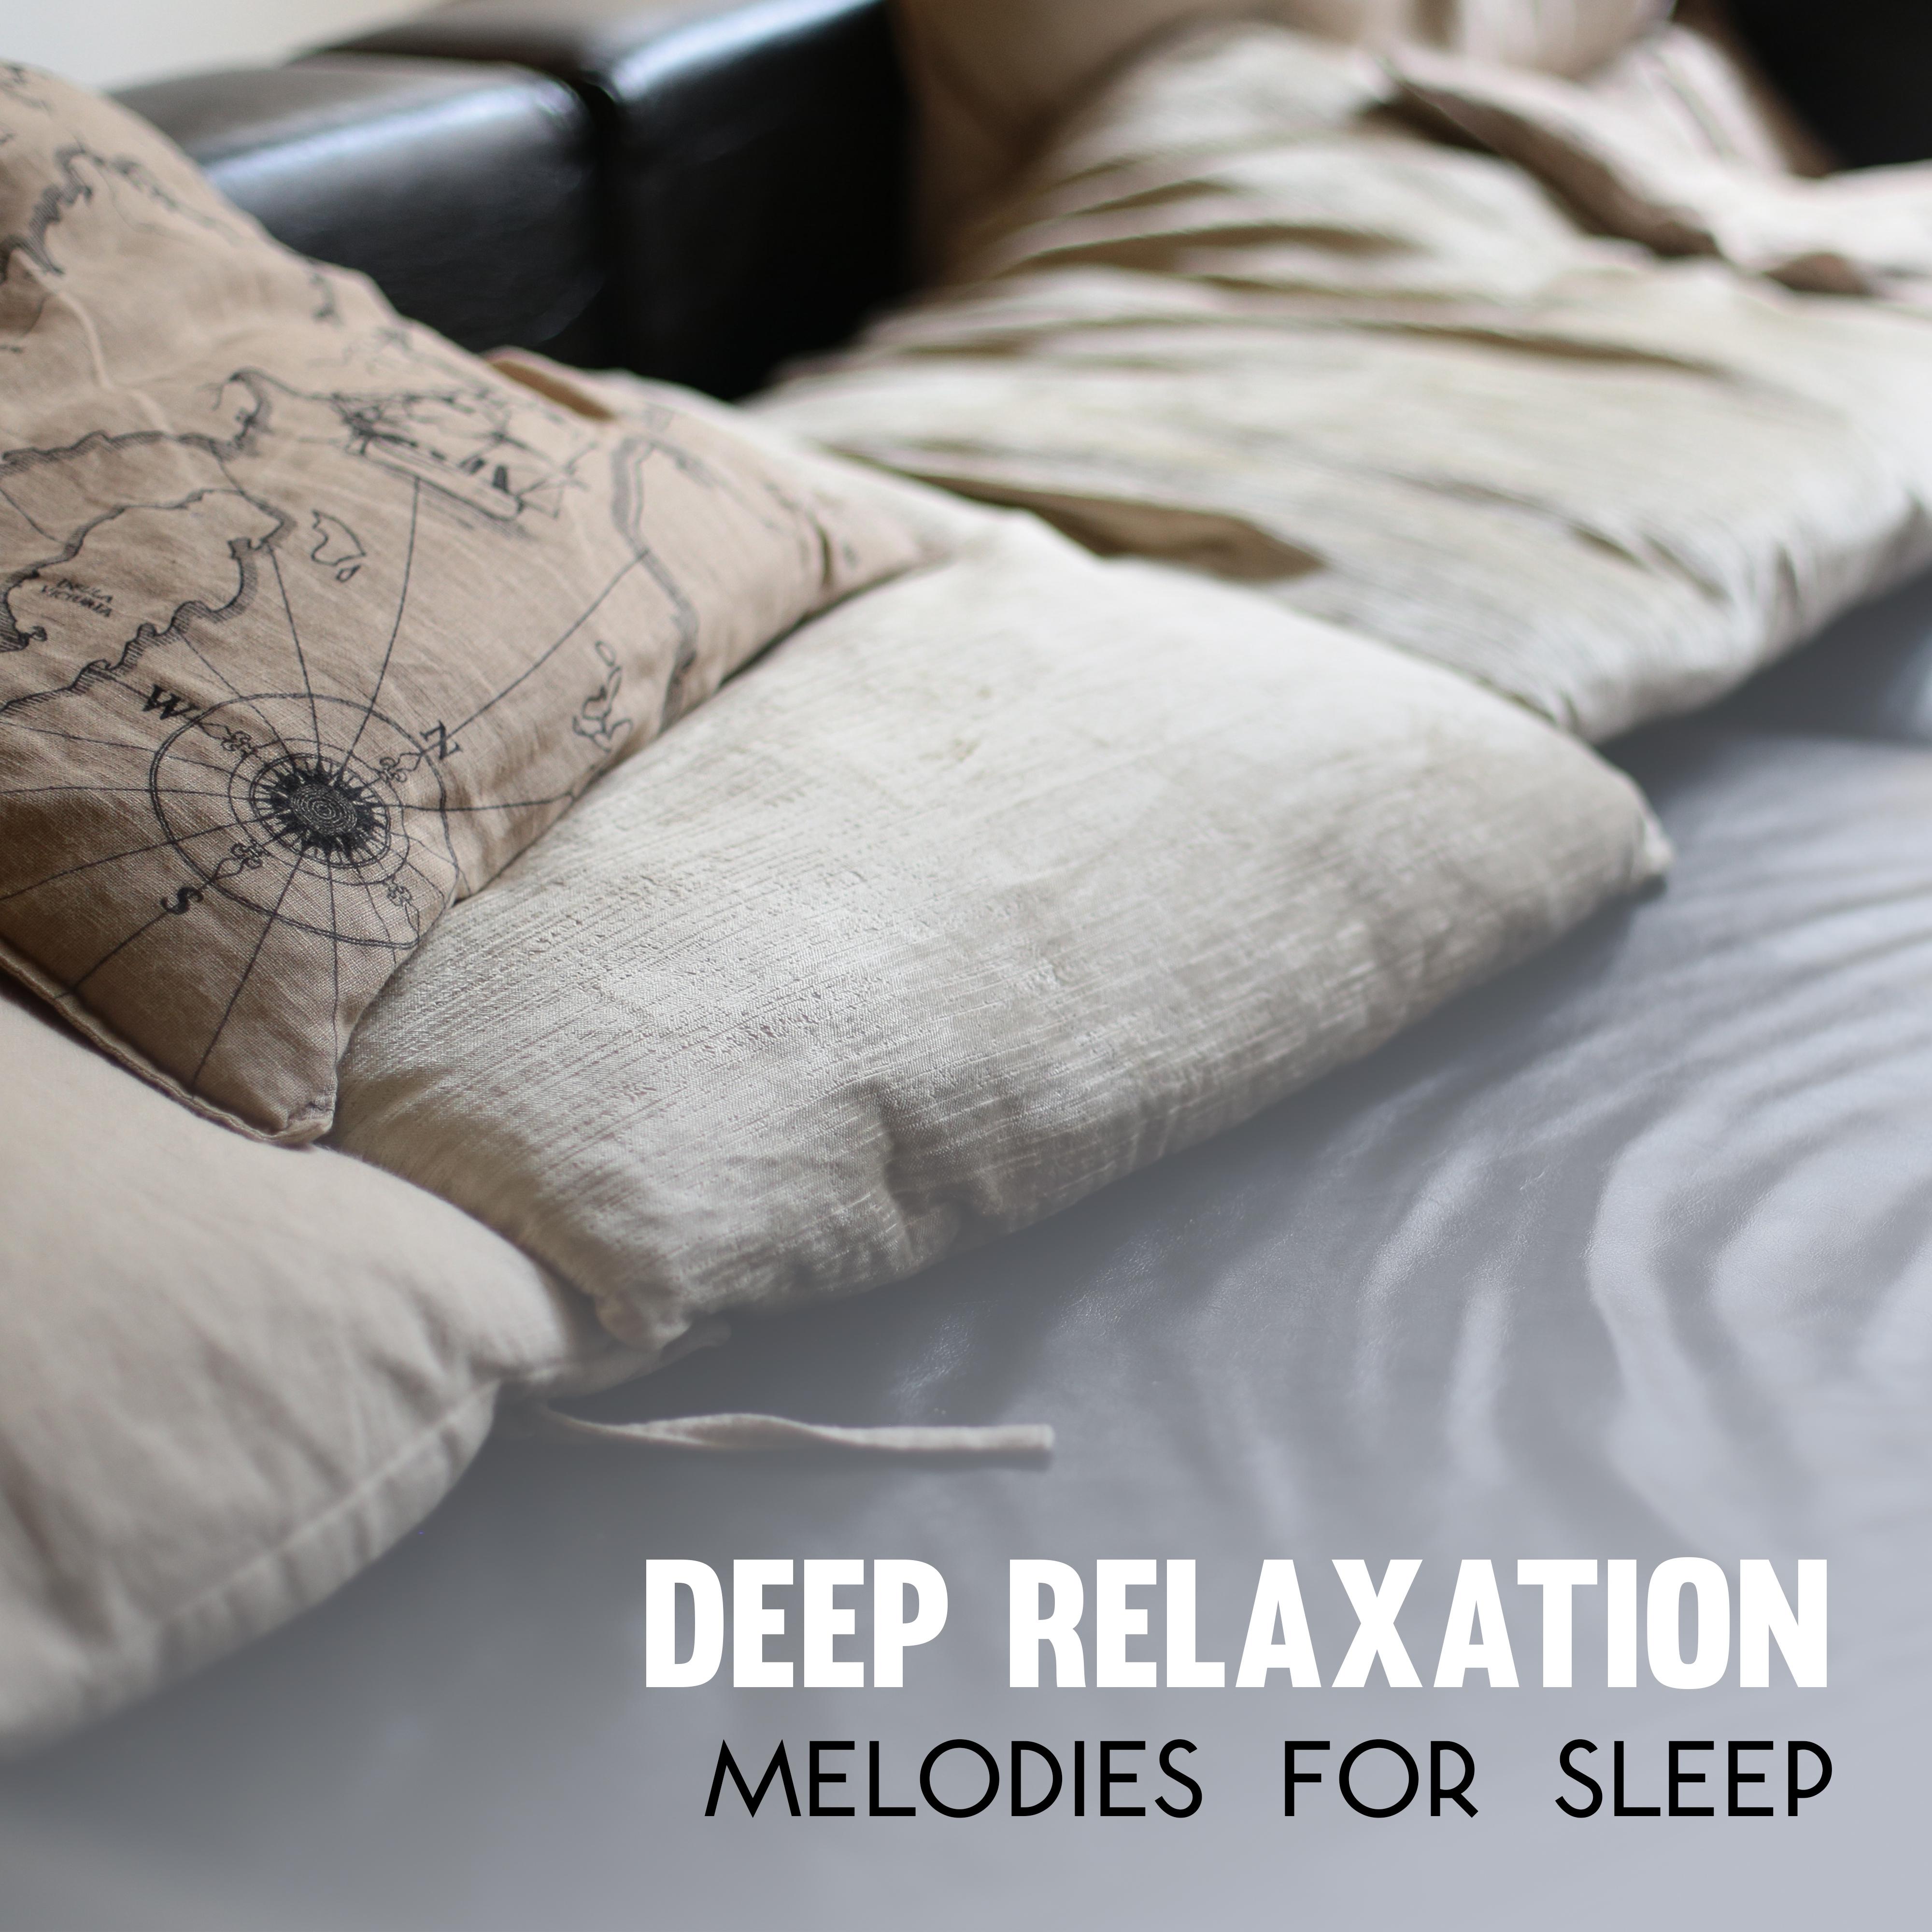 Deep Relaxation Melodies for Sleep – Calm Music to Relax, Peaceful Night Melodies, All Night Dreaming, Soothing New Age